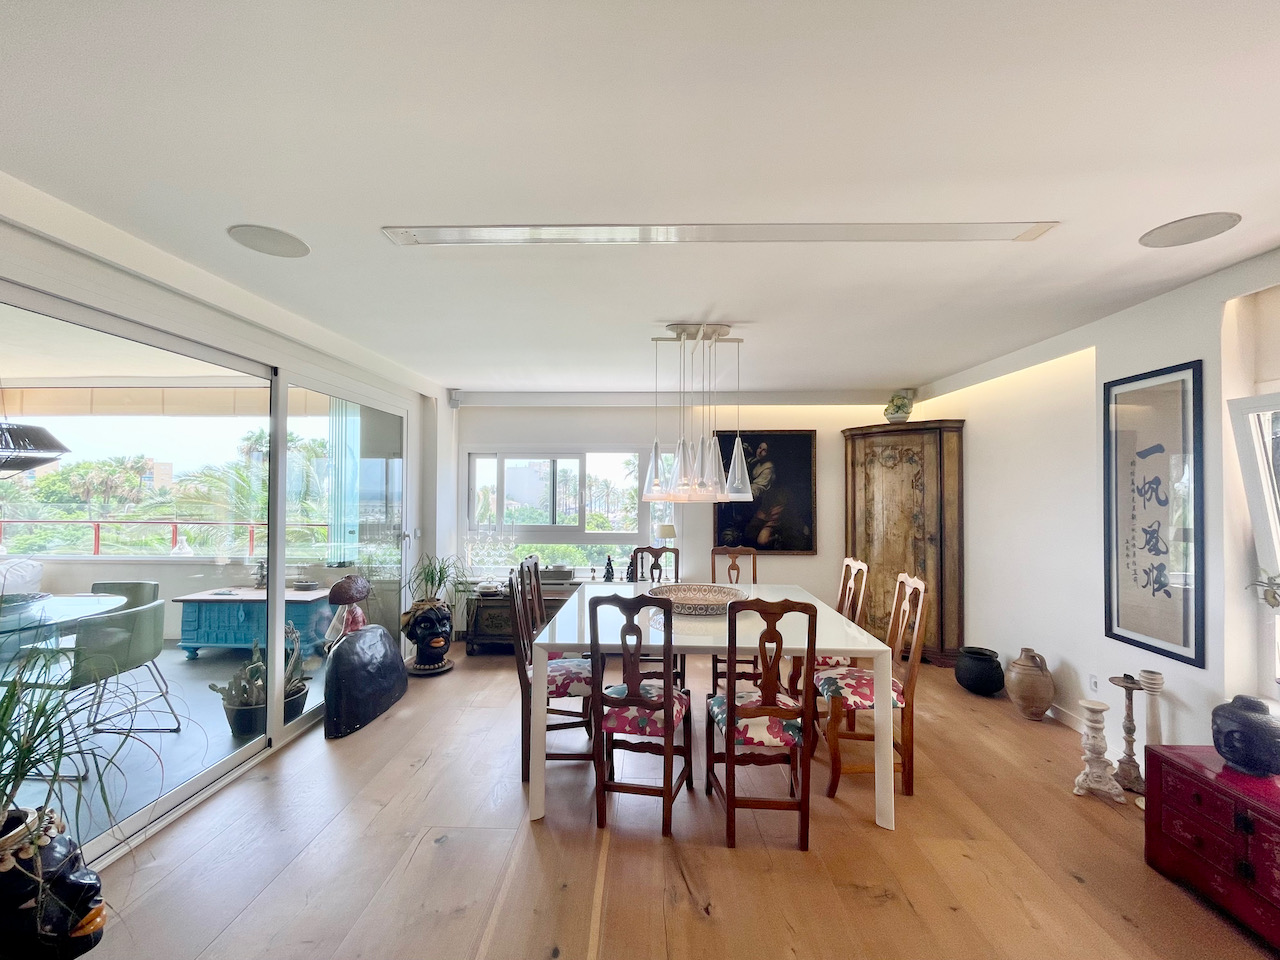 Flat with terrace and sea views in Portixol, Palma.